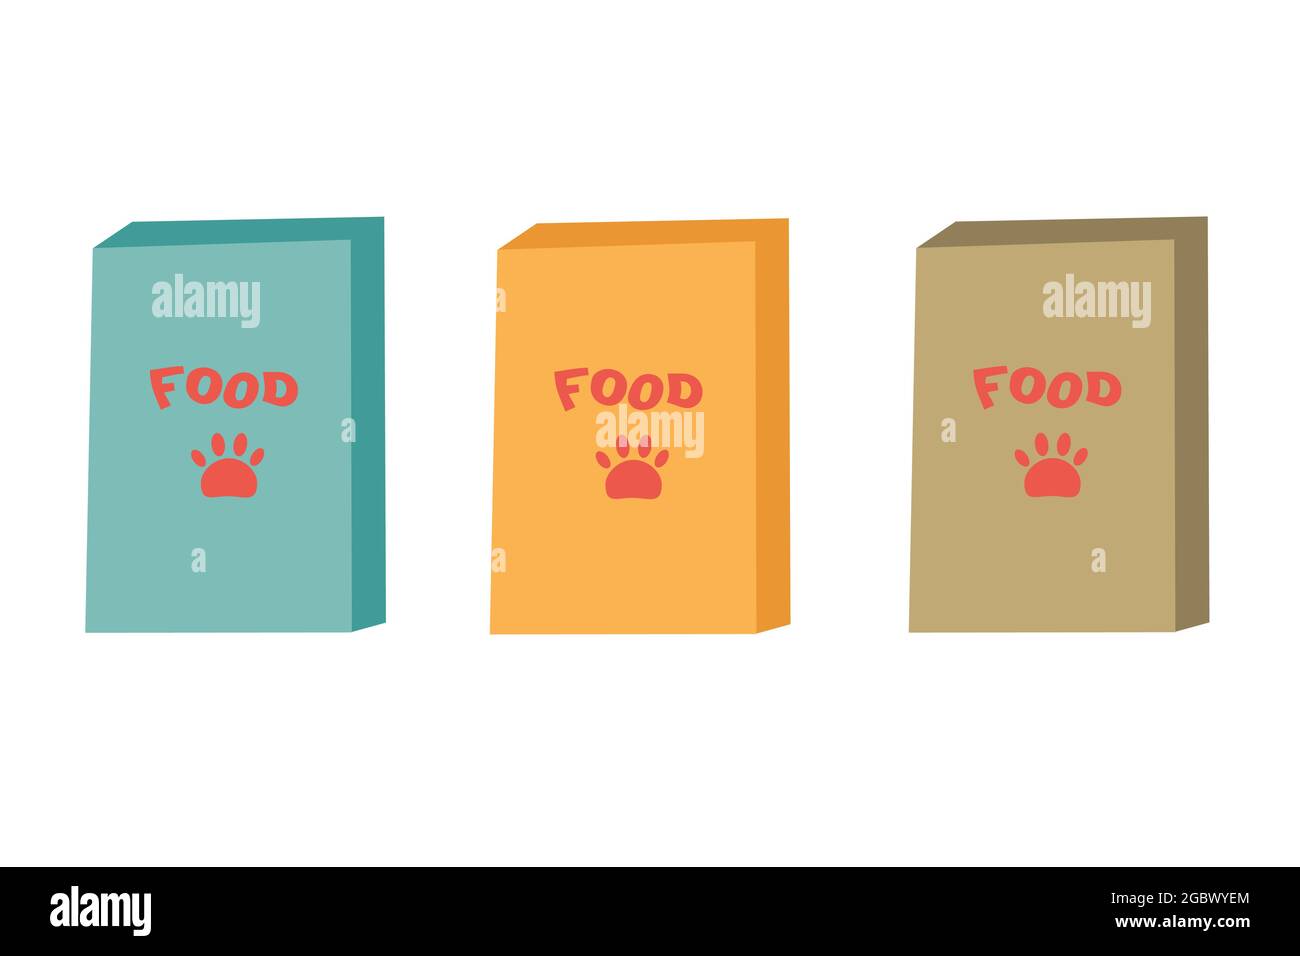 Dry food boxes for dogs and cats. Food with vitamins for animals. Shop concept. Stock Vector